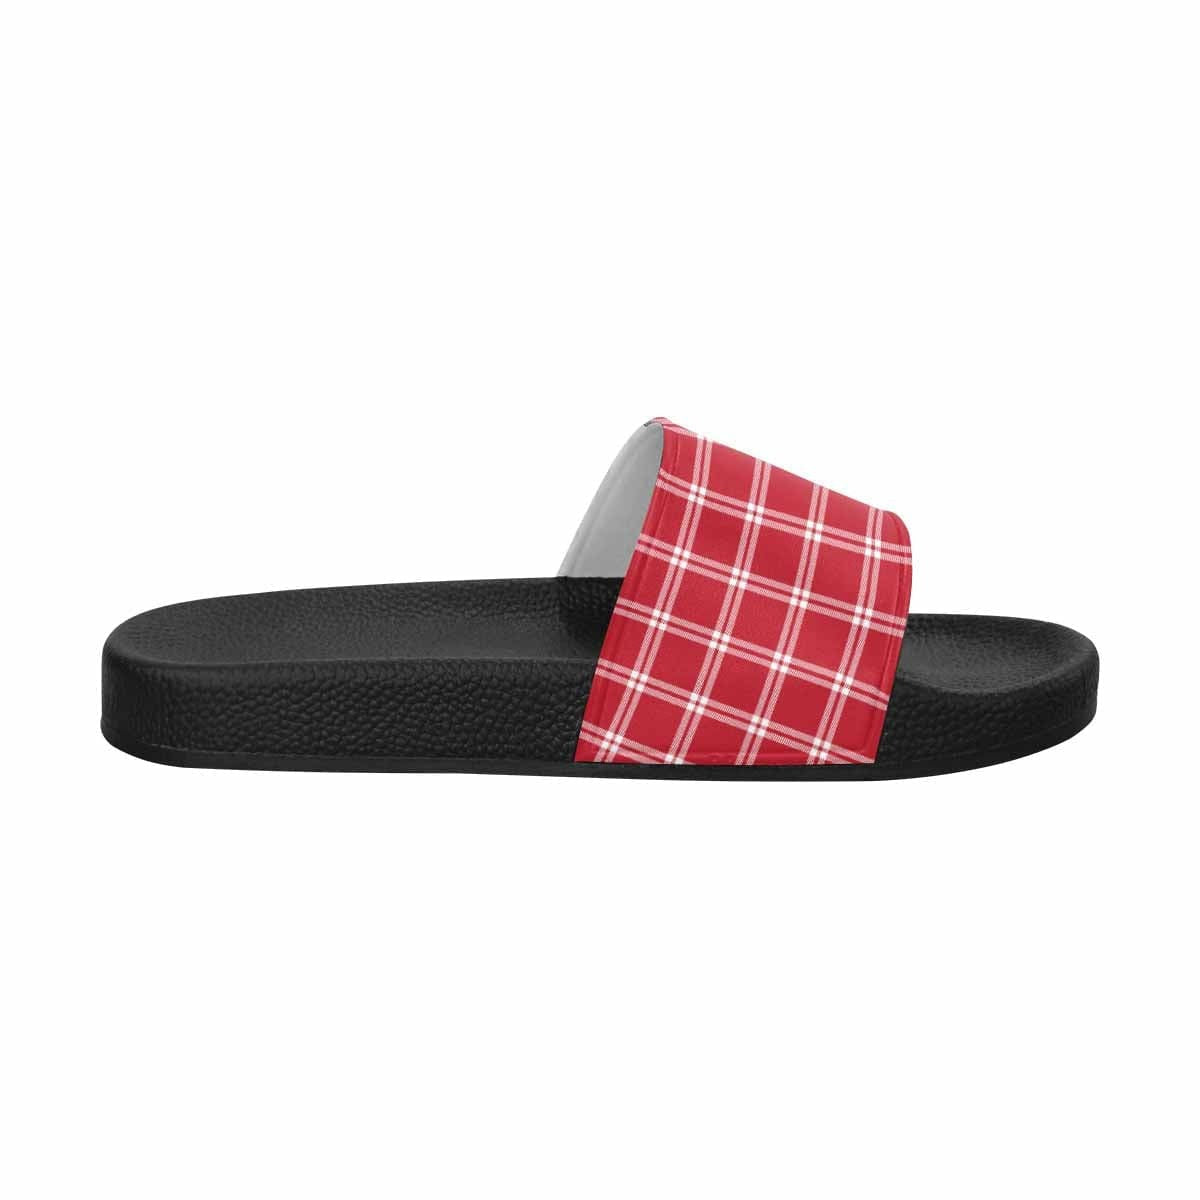 Mens Slide Sandals, Buffalo Plaid Red And White